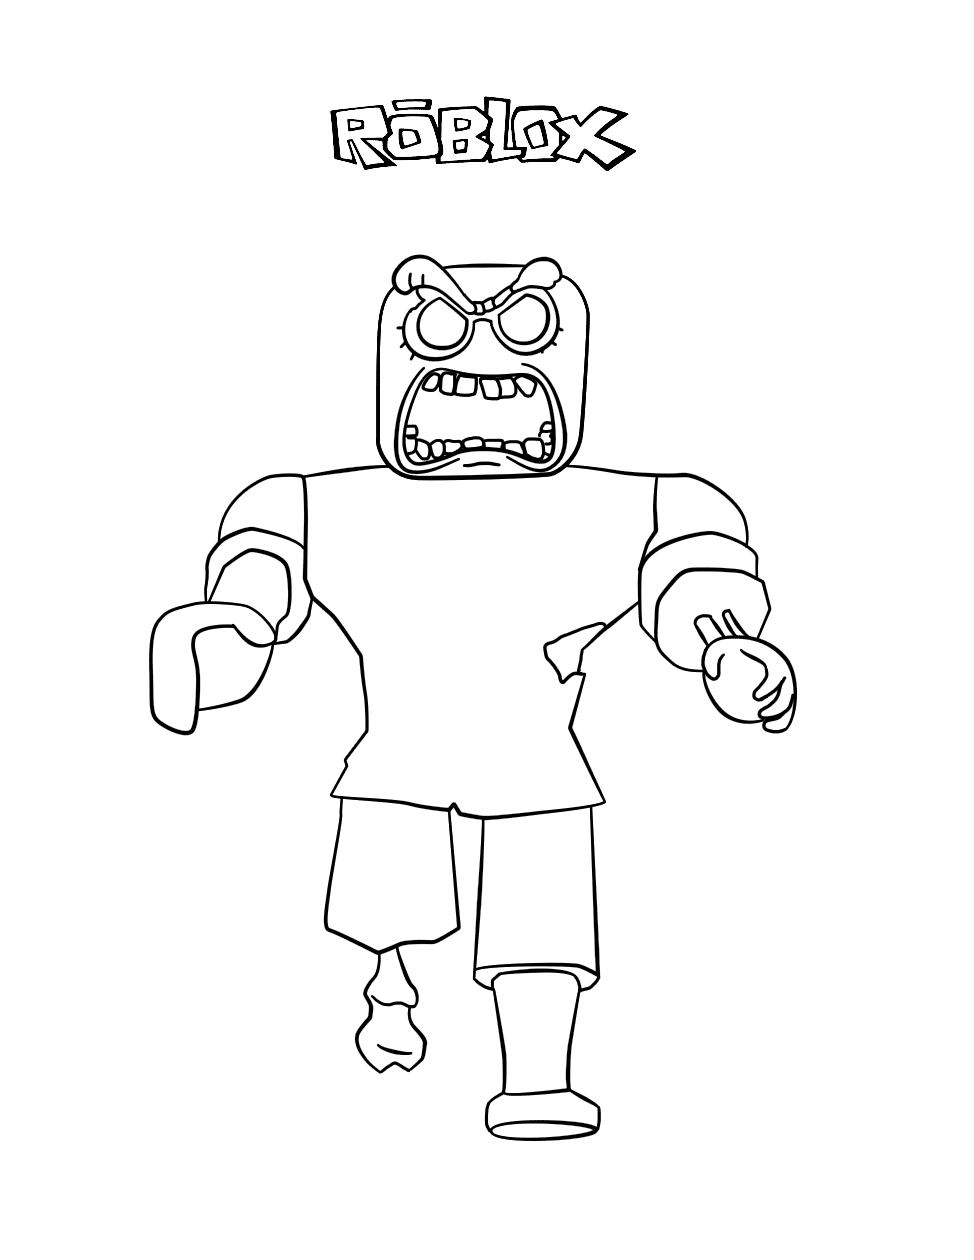 Roblox Zombie Coloring Pages – coloring.rocks!